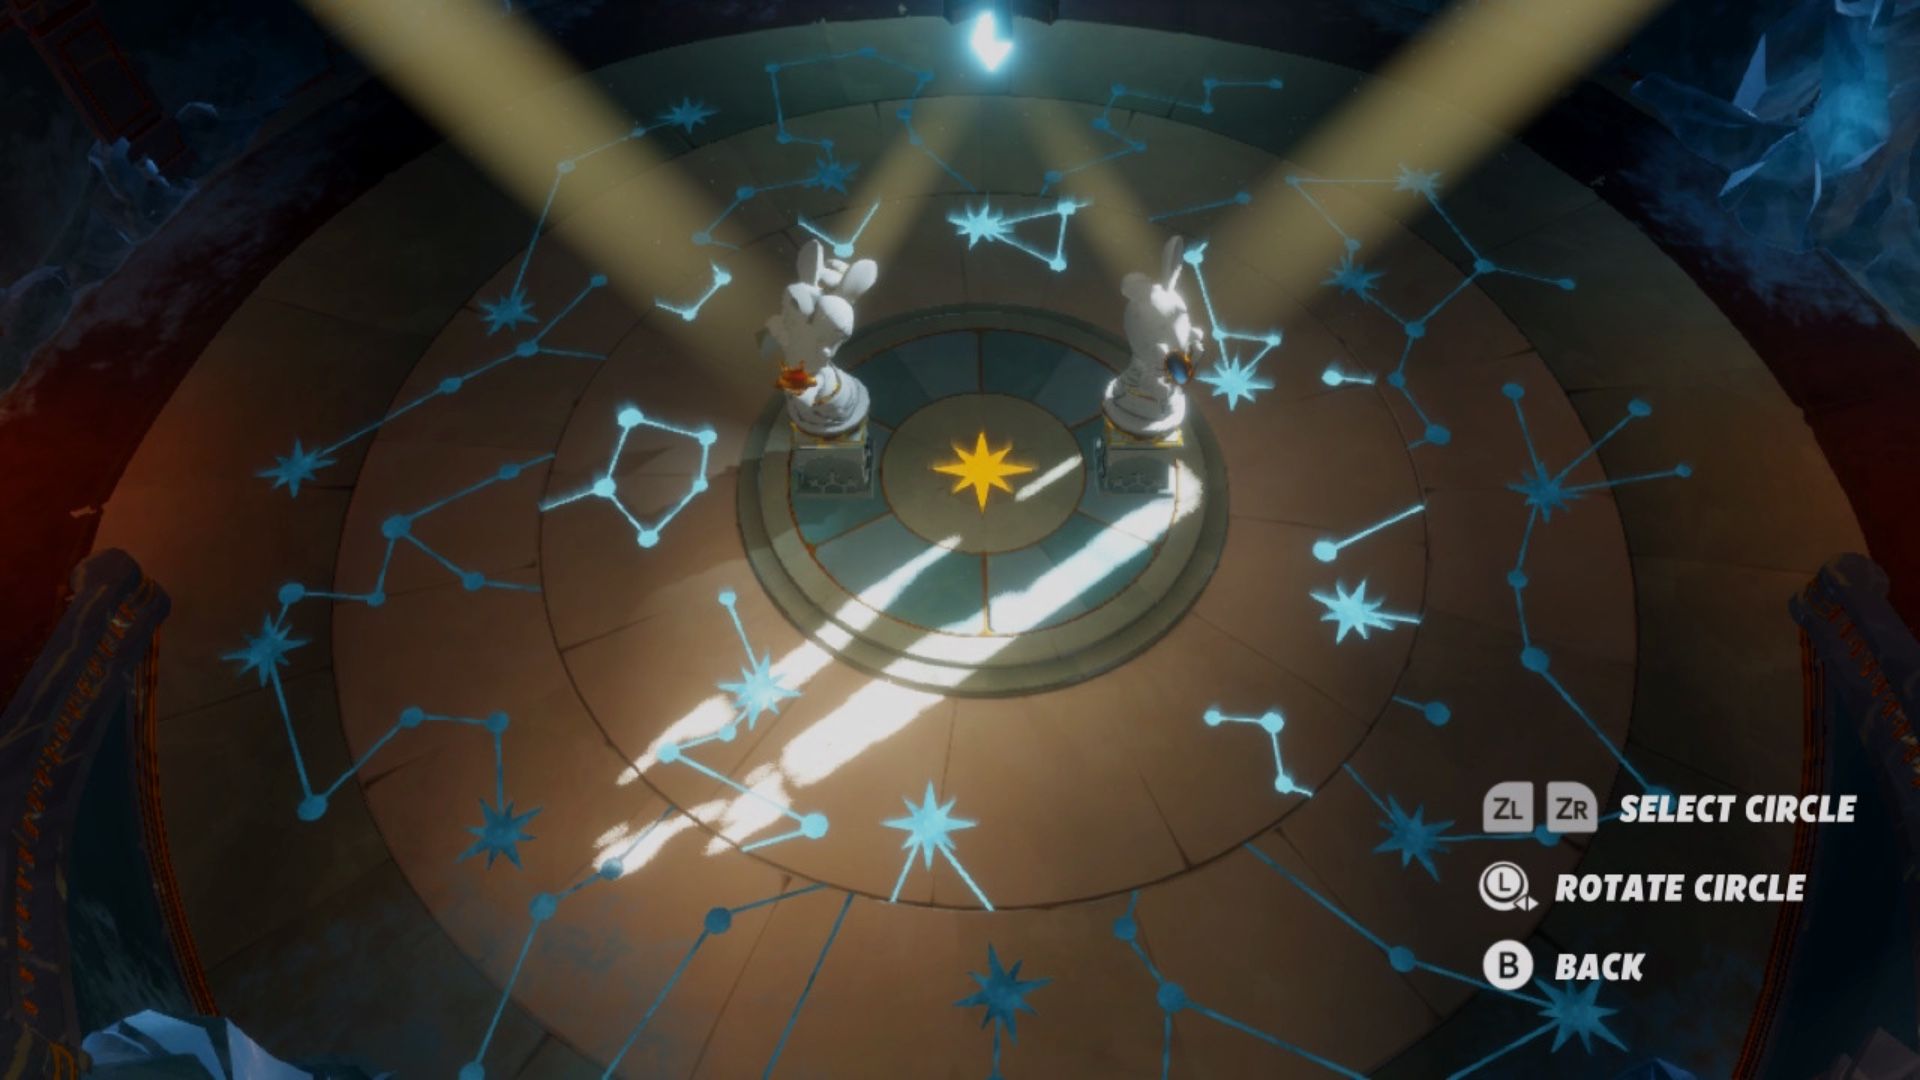 The stars constellation puzzle you need to solve by rotating each ring in Sparks of Hope